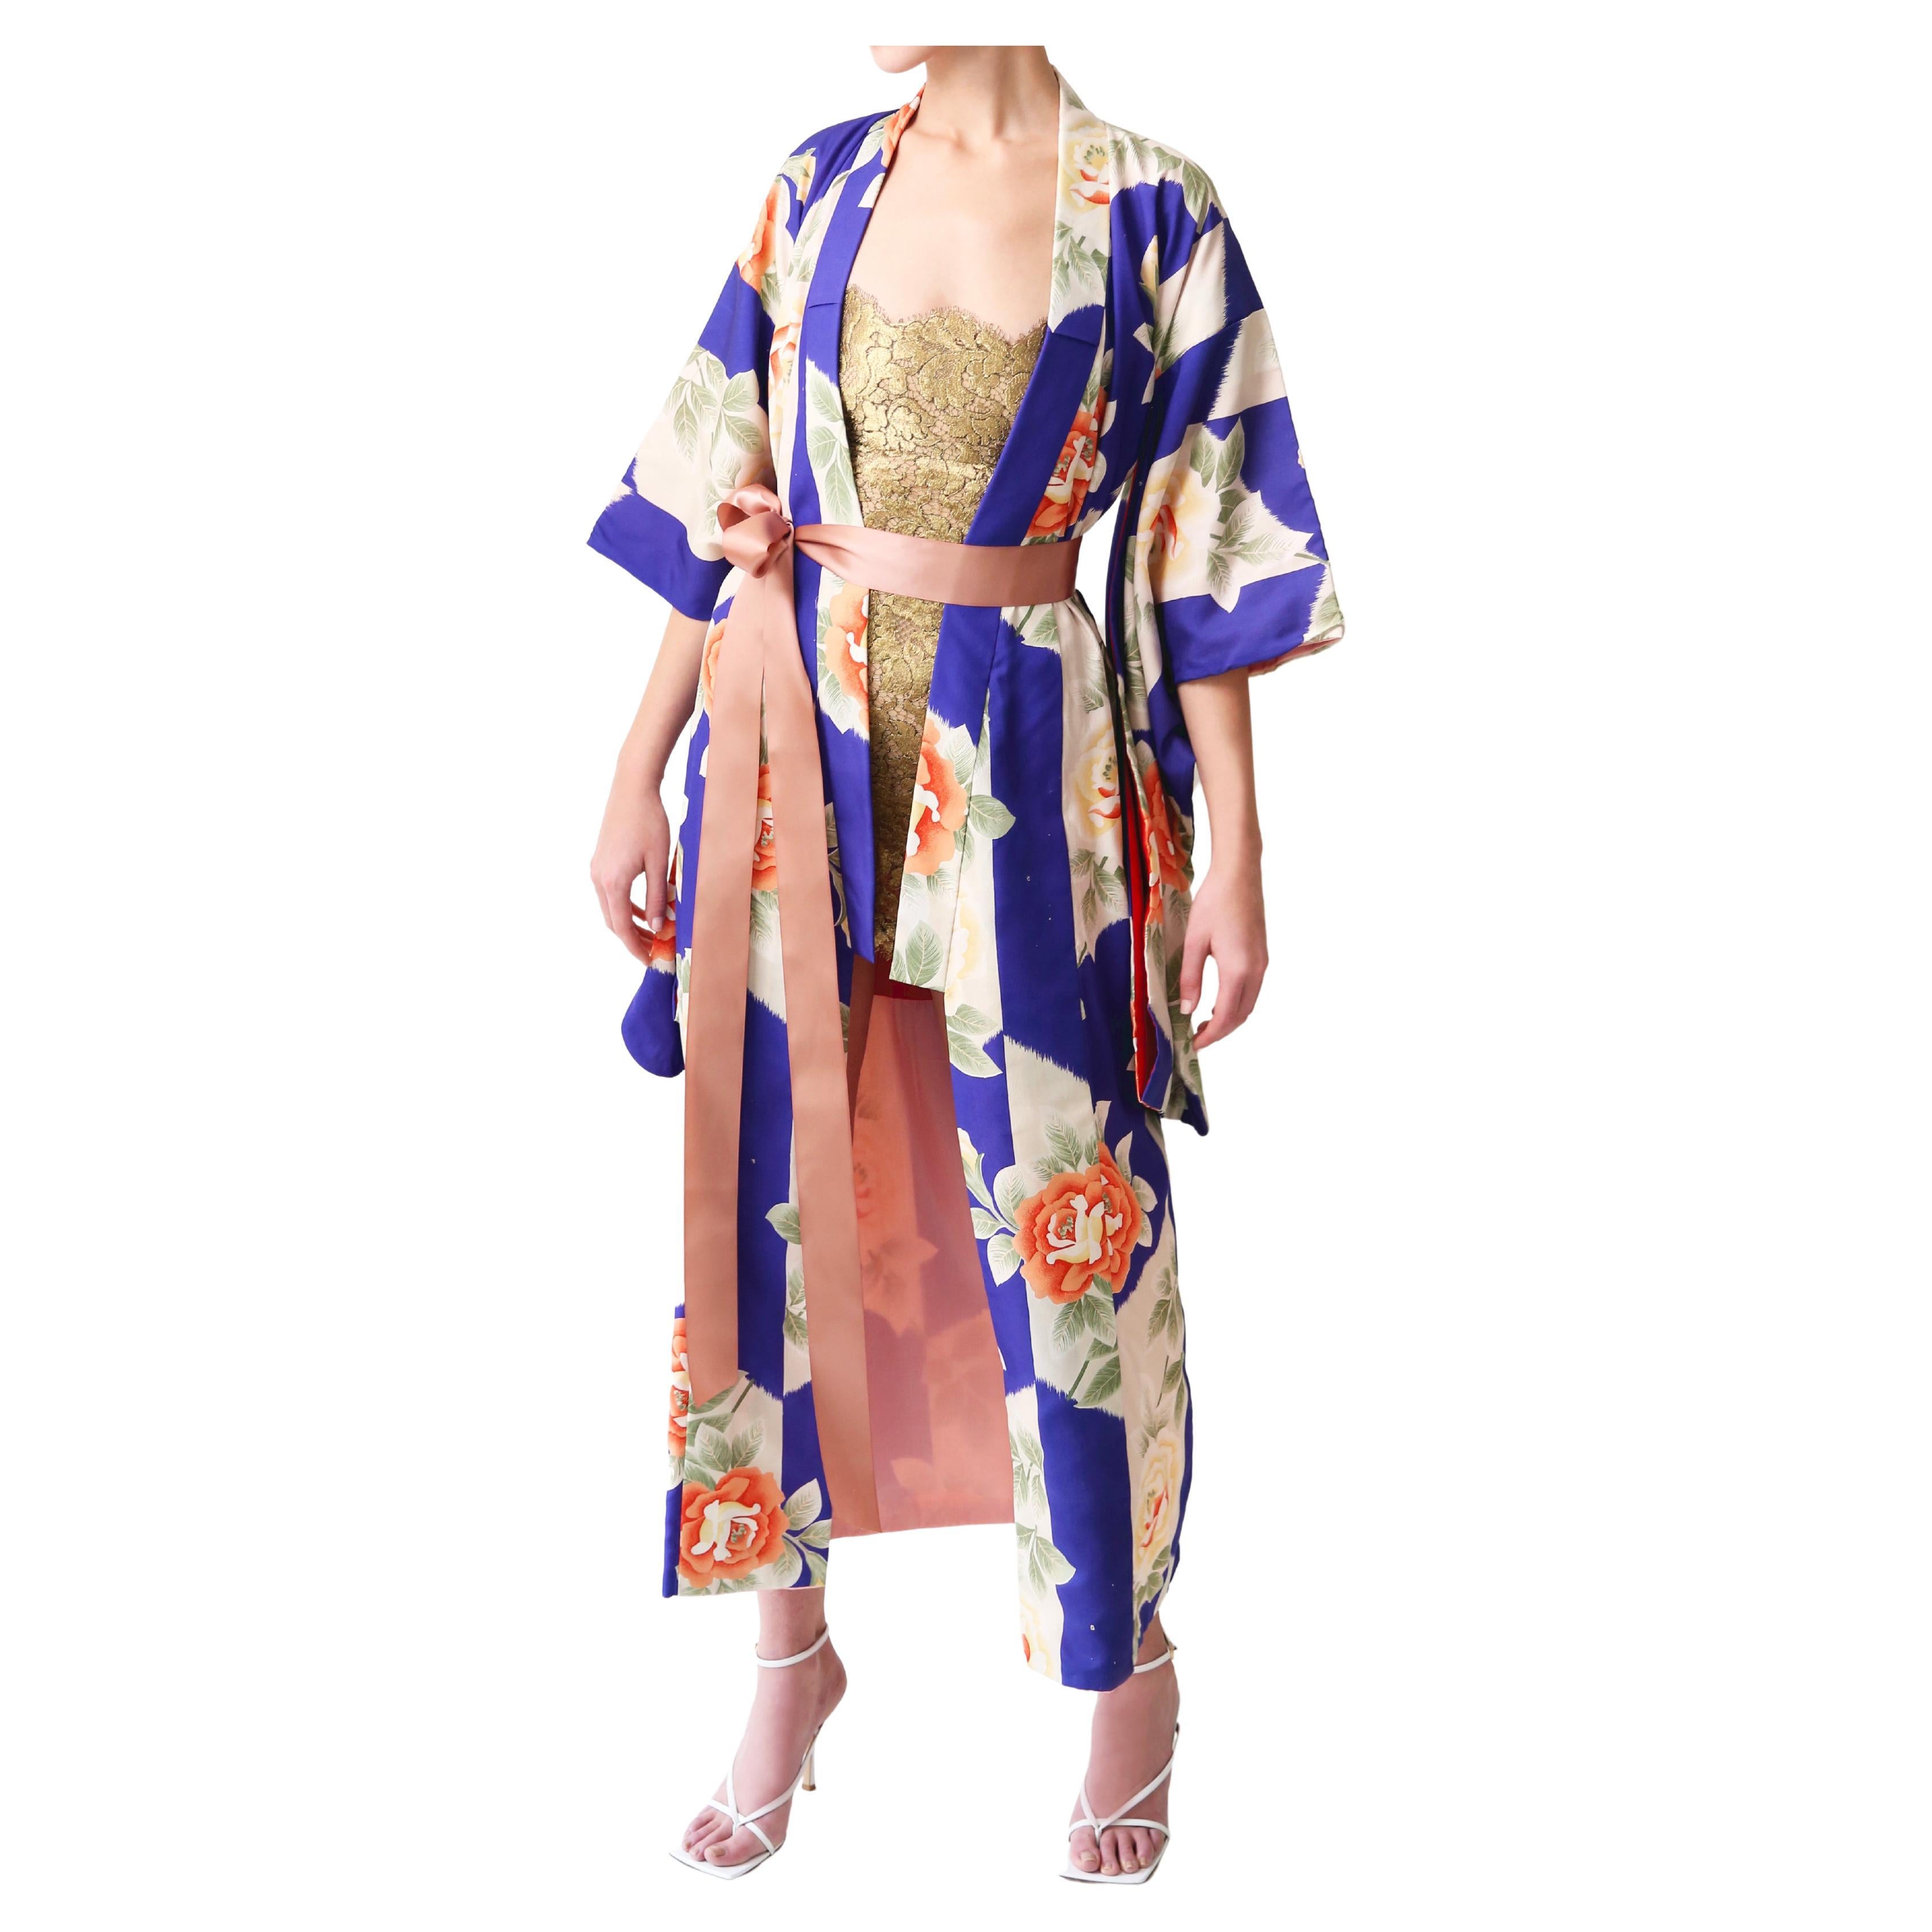 Vintage Japanese hand made blue floral rose silk over coat maxi robe gown kimono